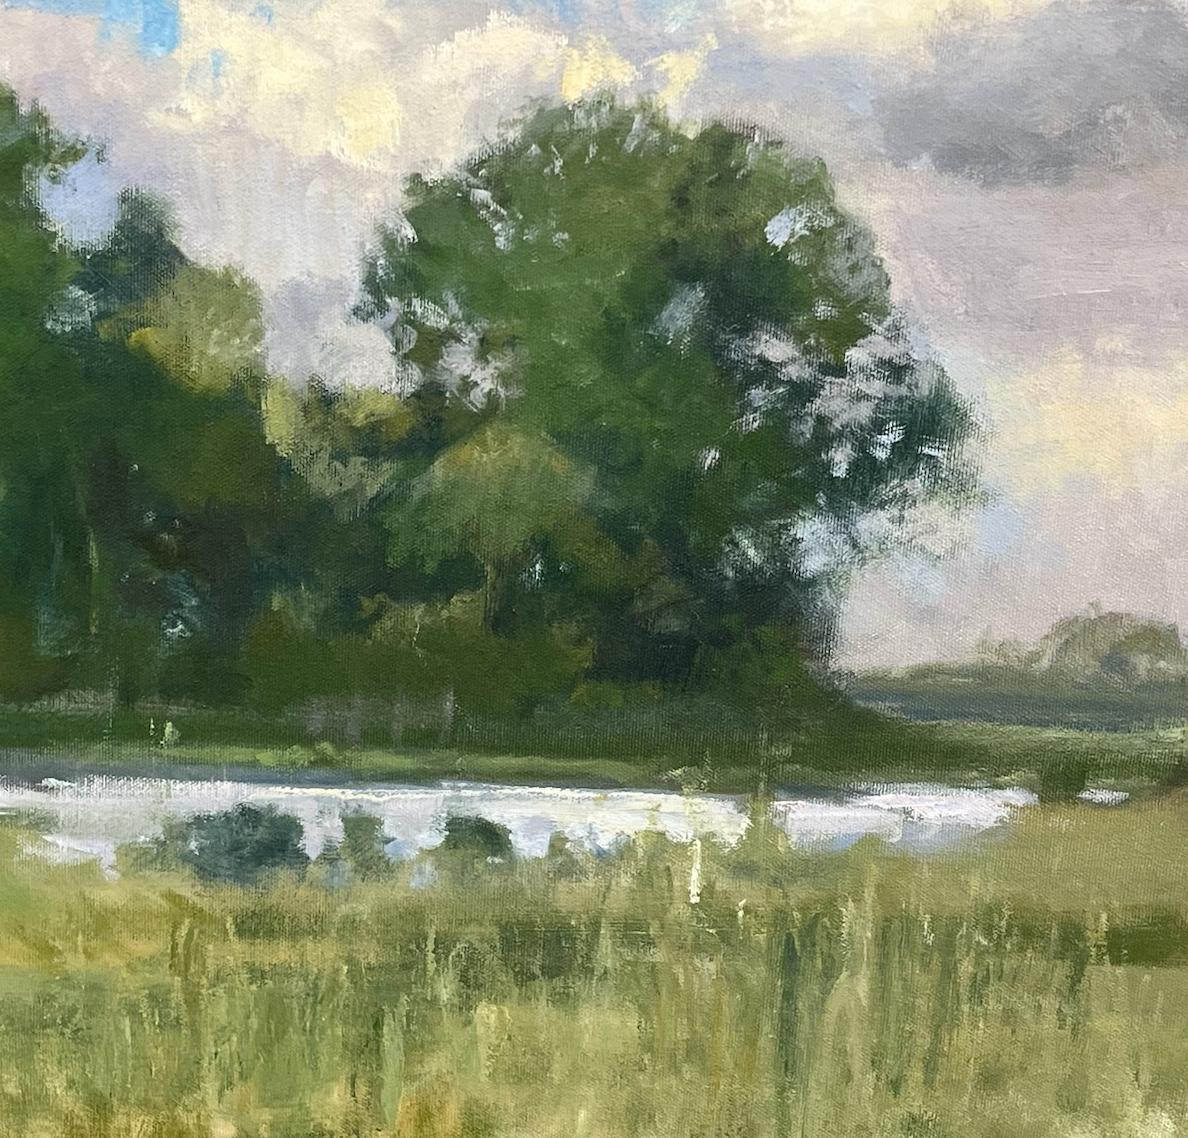 George Ranch  Texas Landscape  Oil  American Impressionism  Light and Shadow  - American Impressionist Painting by Steve Parker